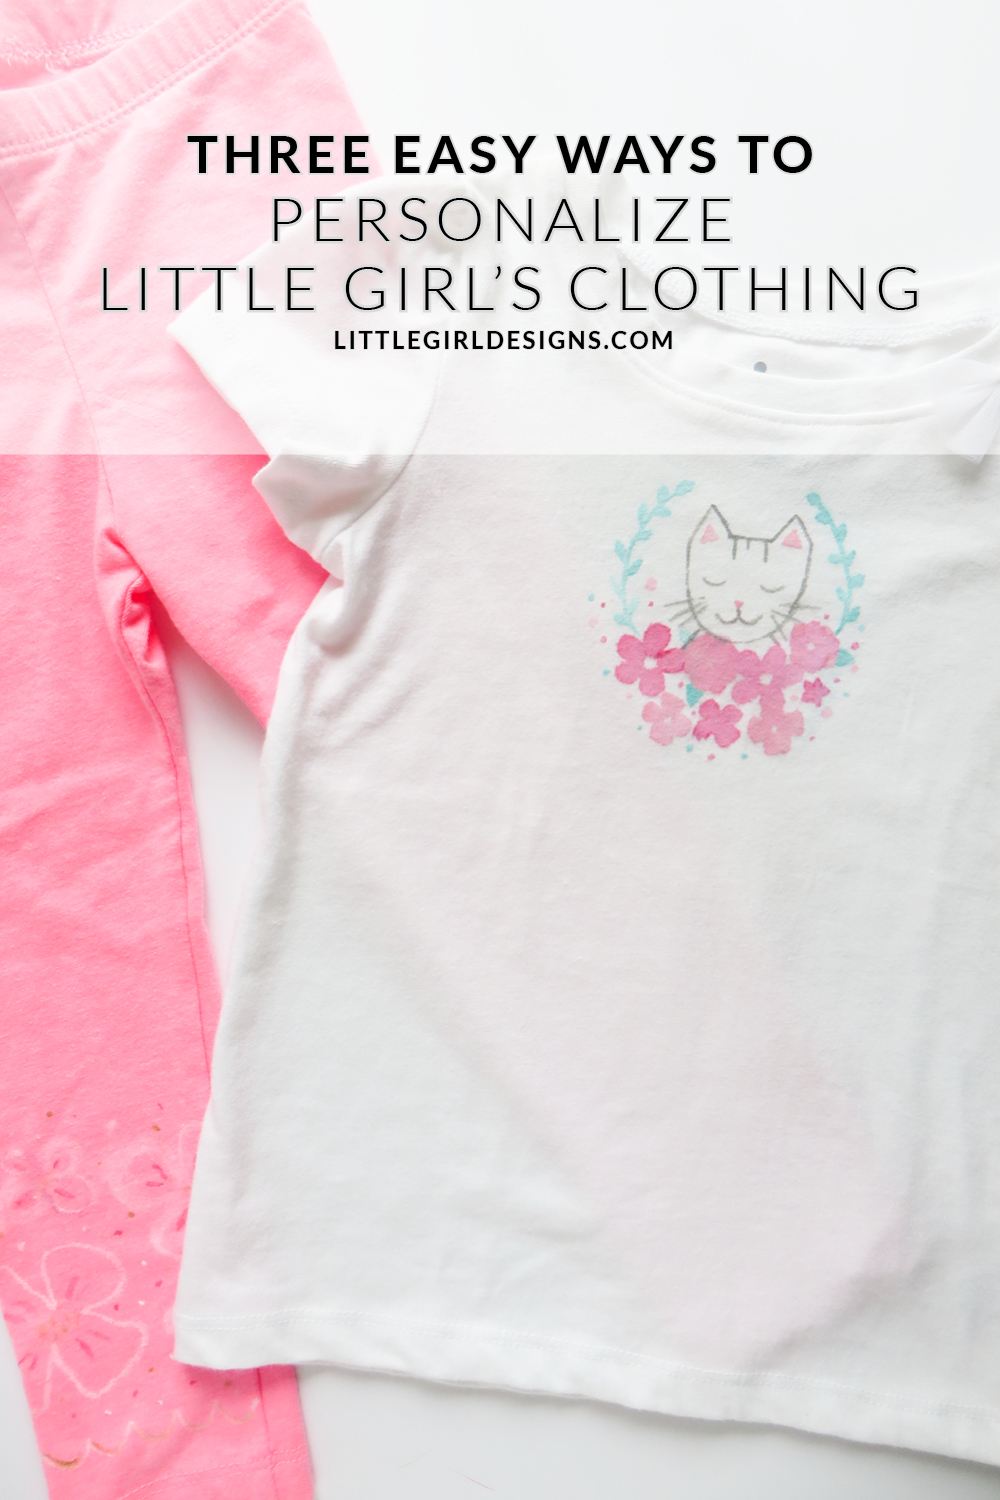 Three Easy Ways to Personalize Little Girl’s Clothing